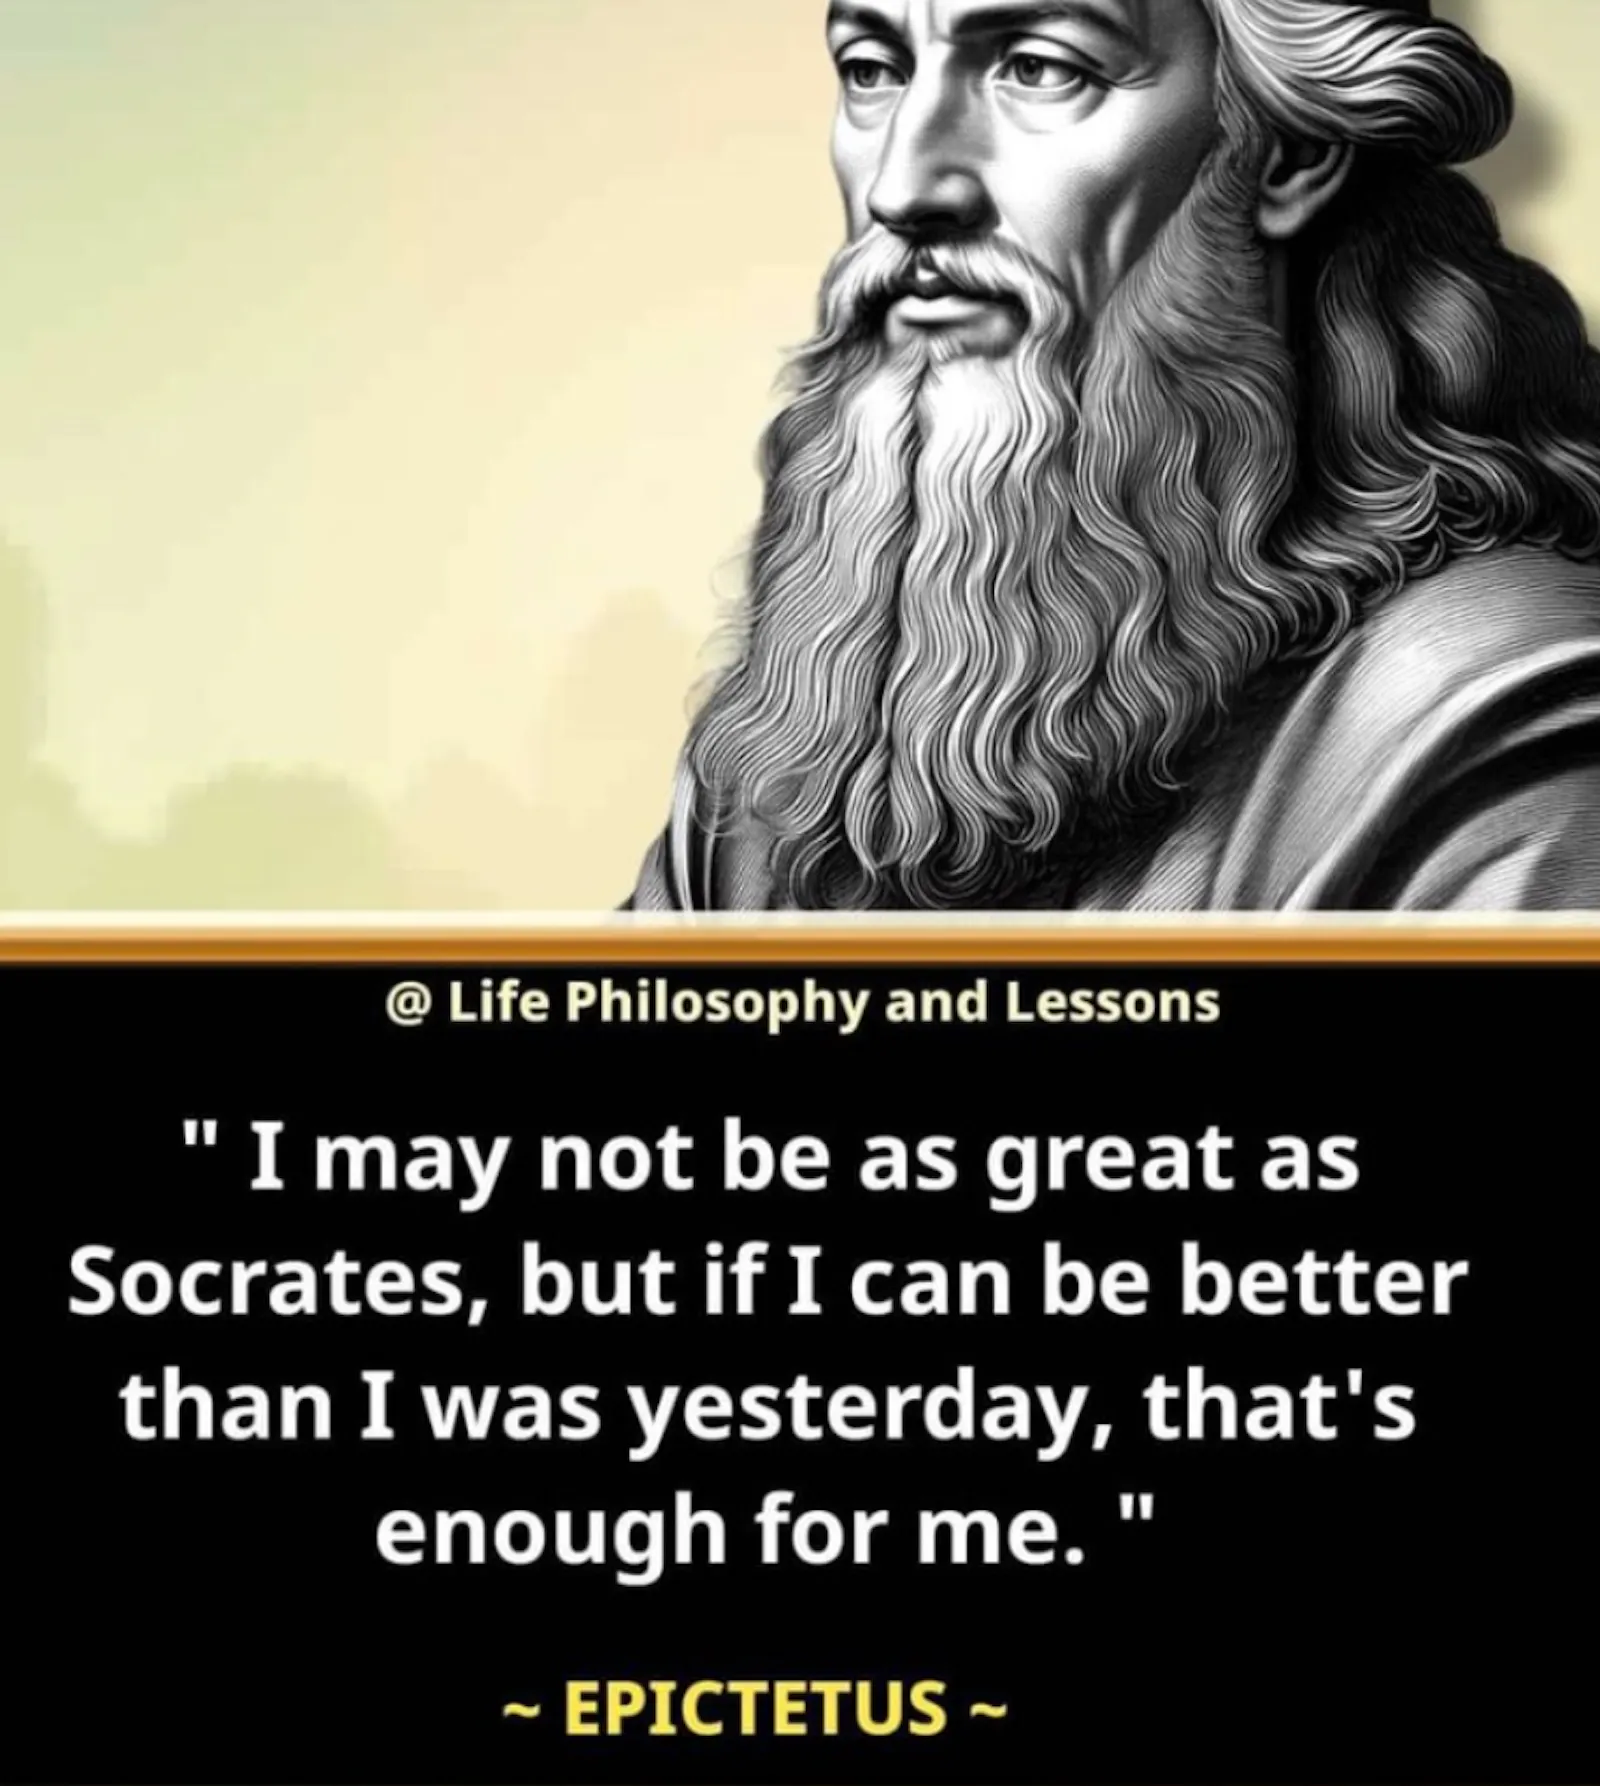 "I may not be as great as Socrates, but if I can be better than I was yesterday, that's enough for me." - Epictetus